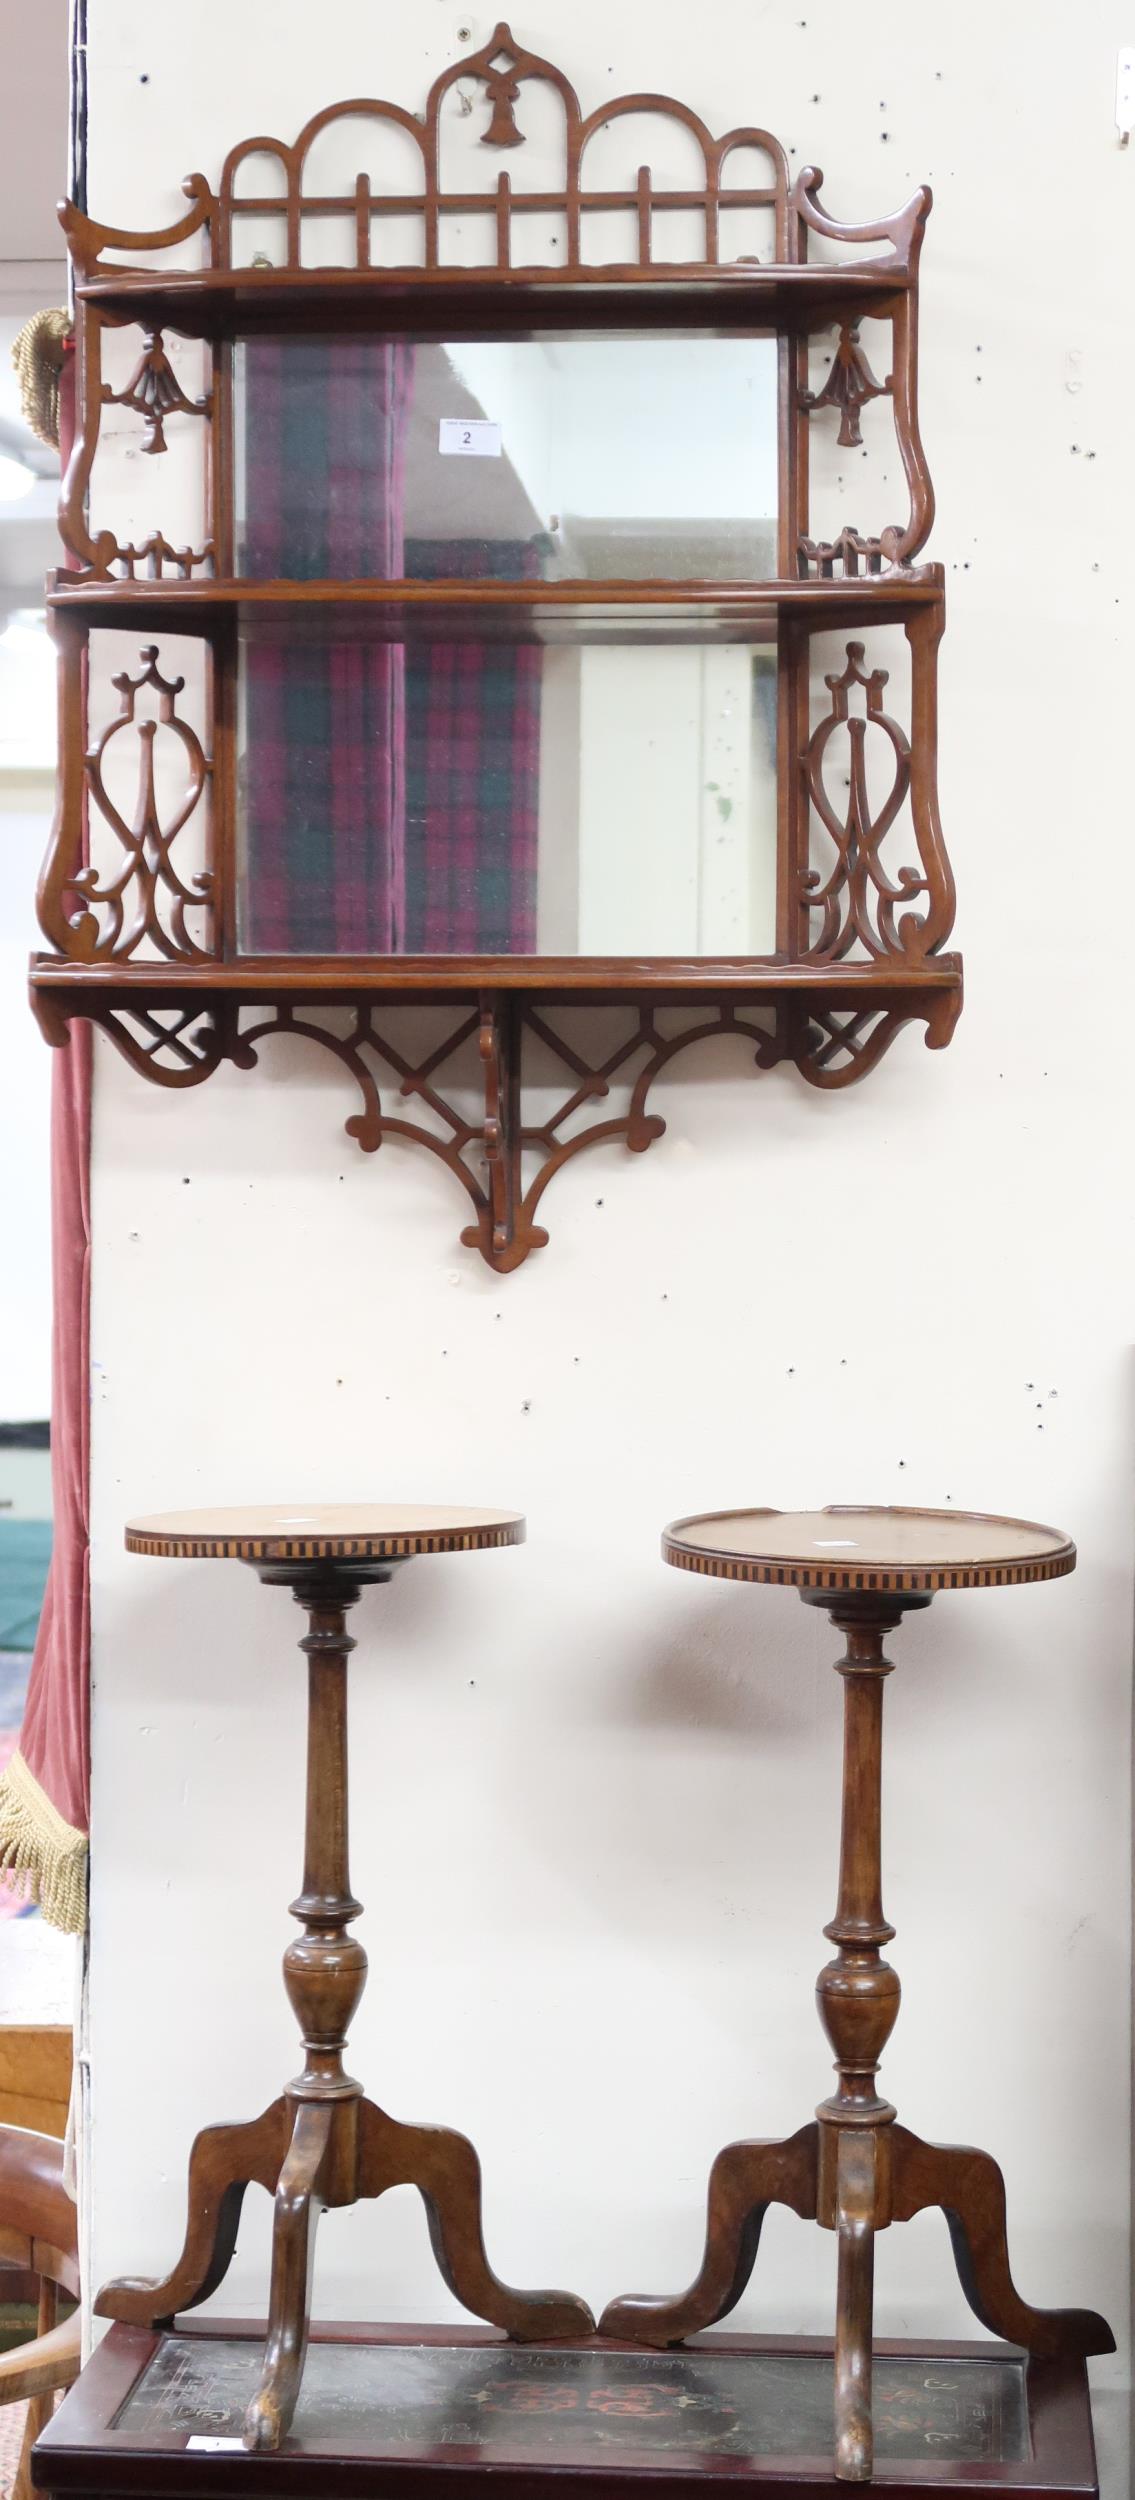 A lot comprising 19th century mahogany mirror backed wall shelf with decorative fretwork mounts